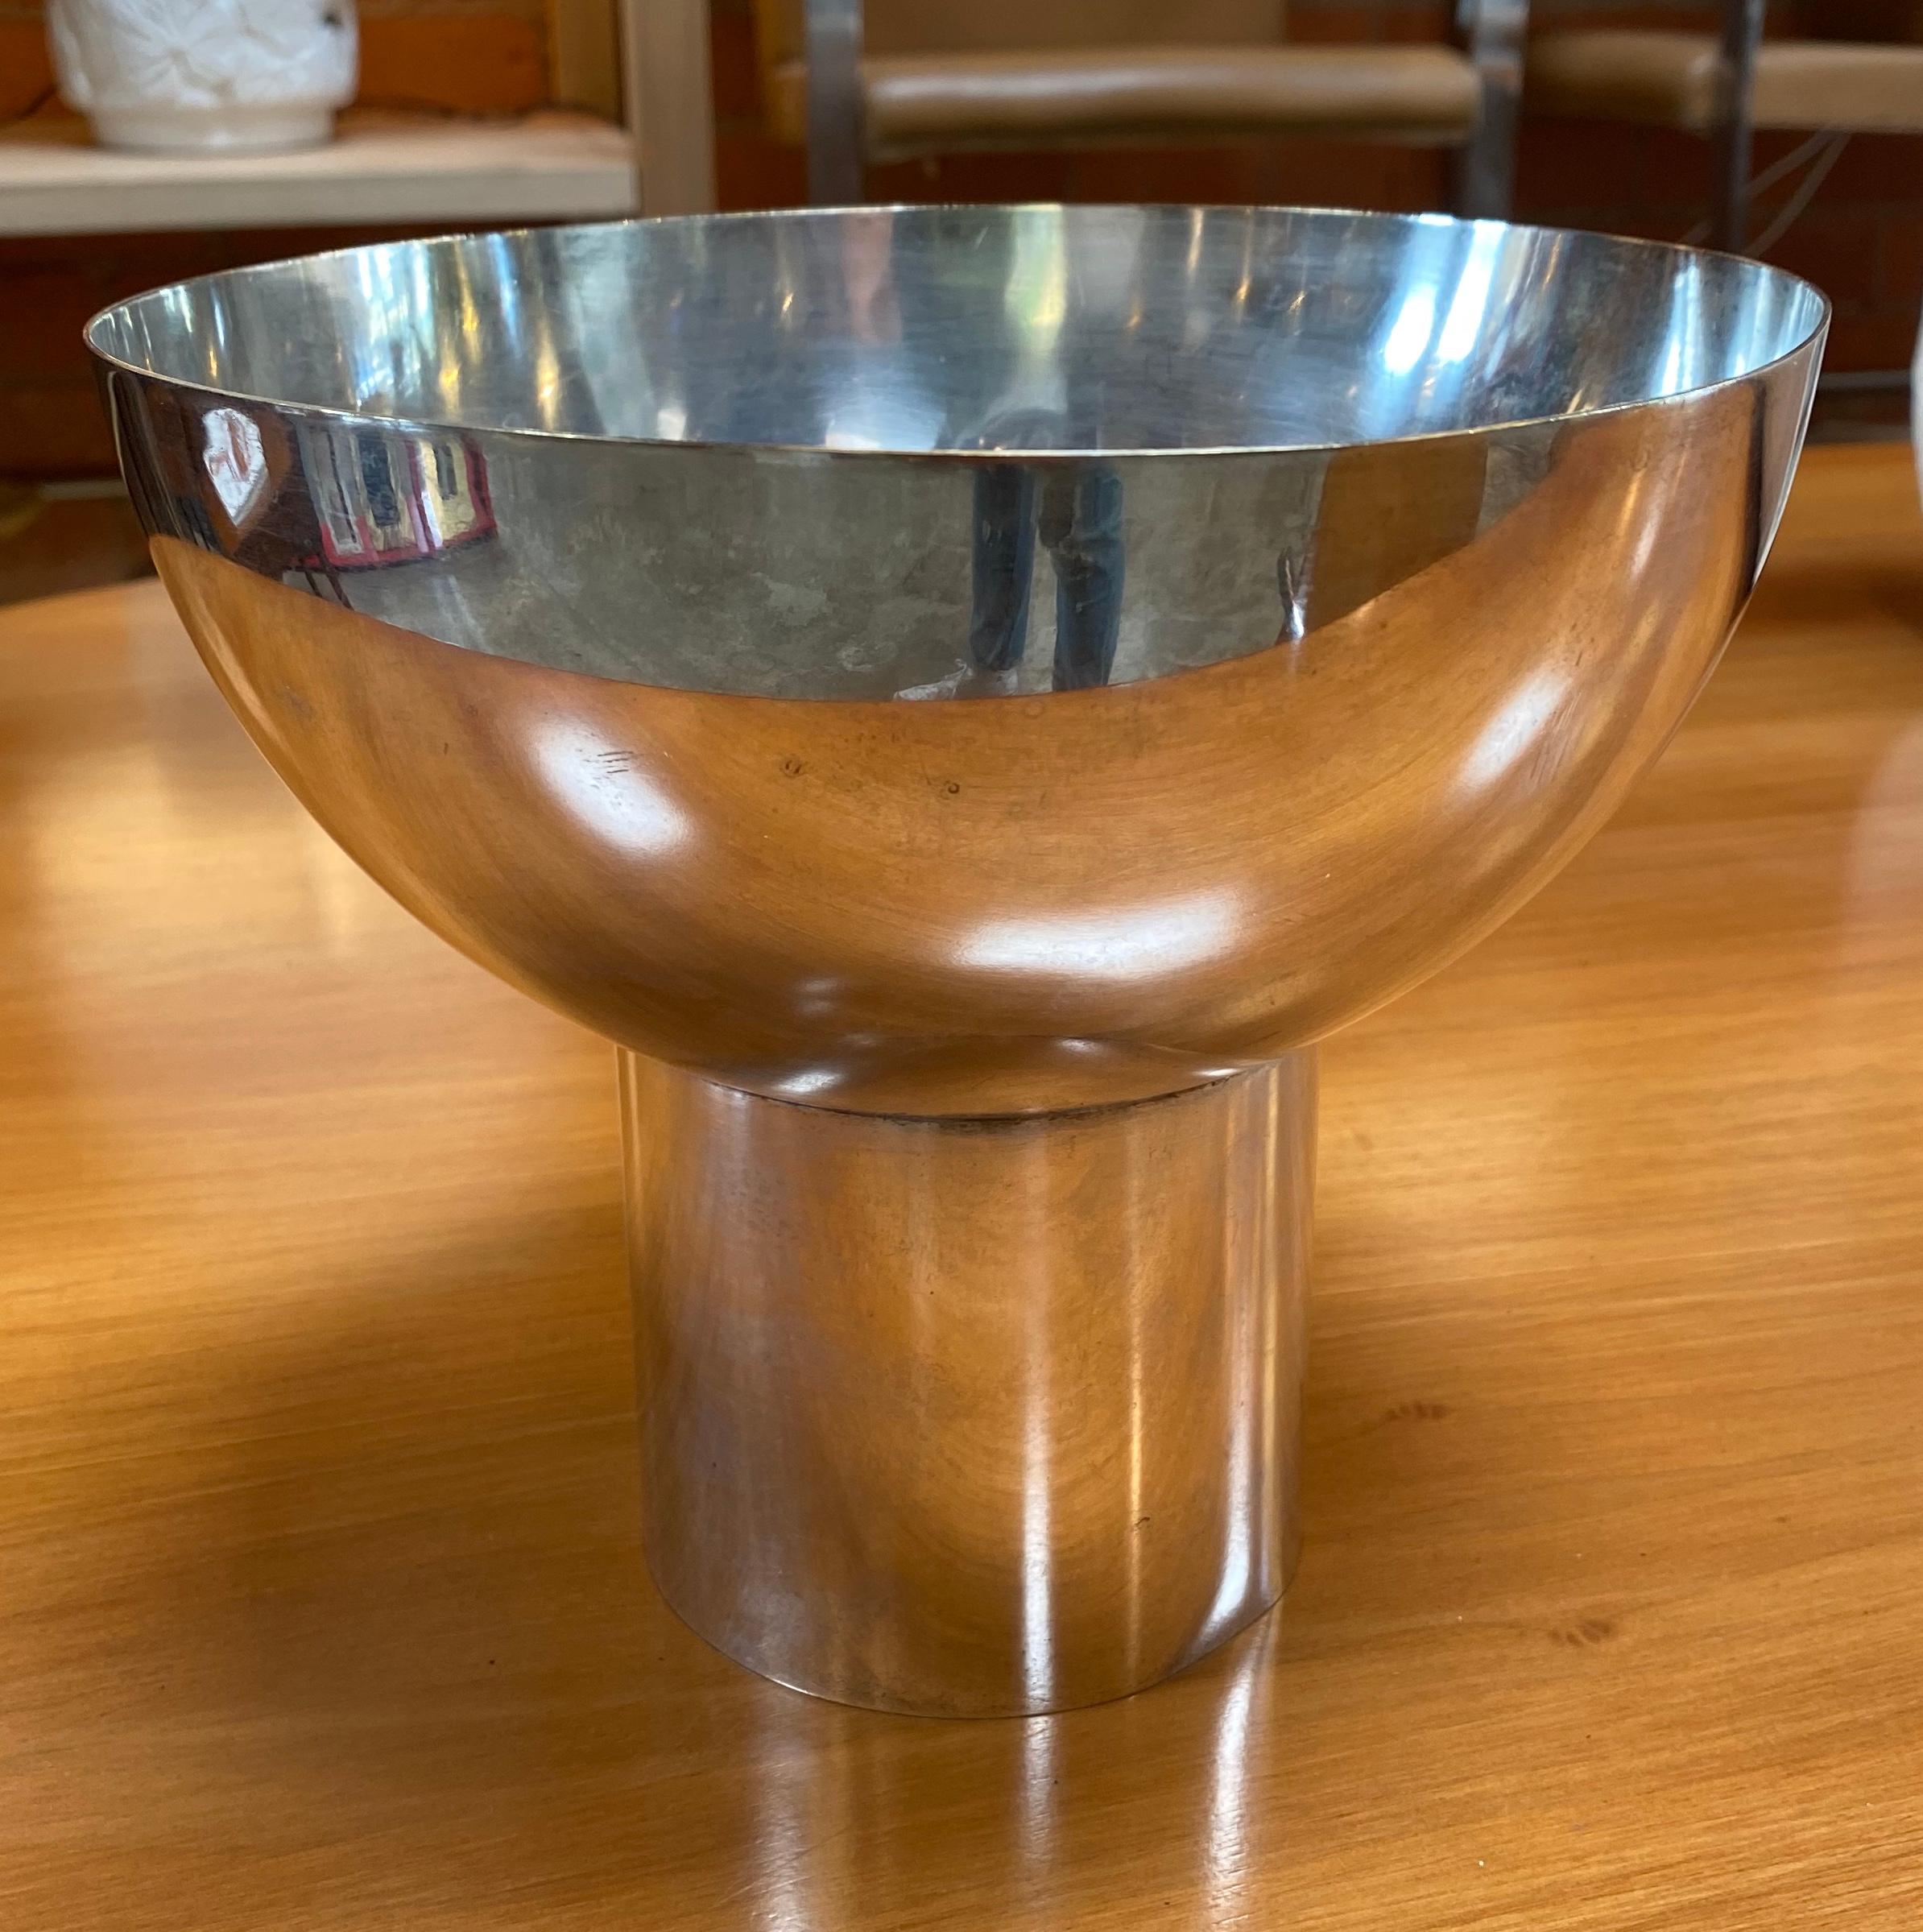 Beautiful and vintage silver bowl made in the Italy, 1960s.
The bowl is in vintage condition.